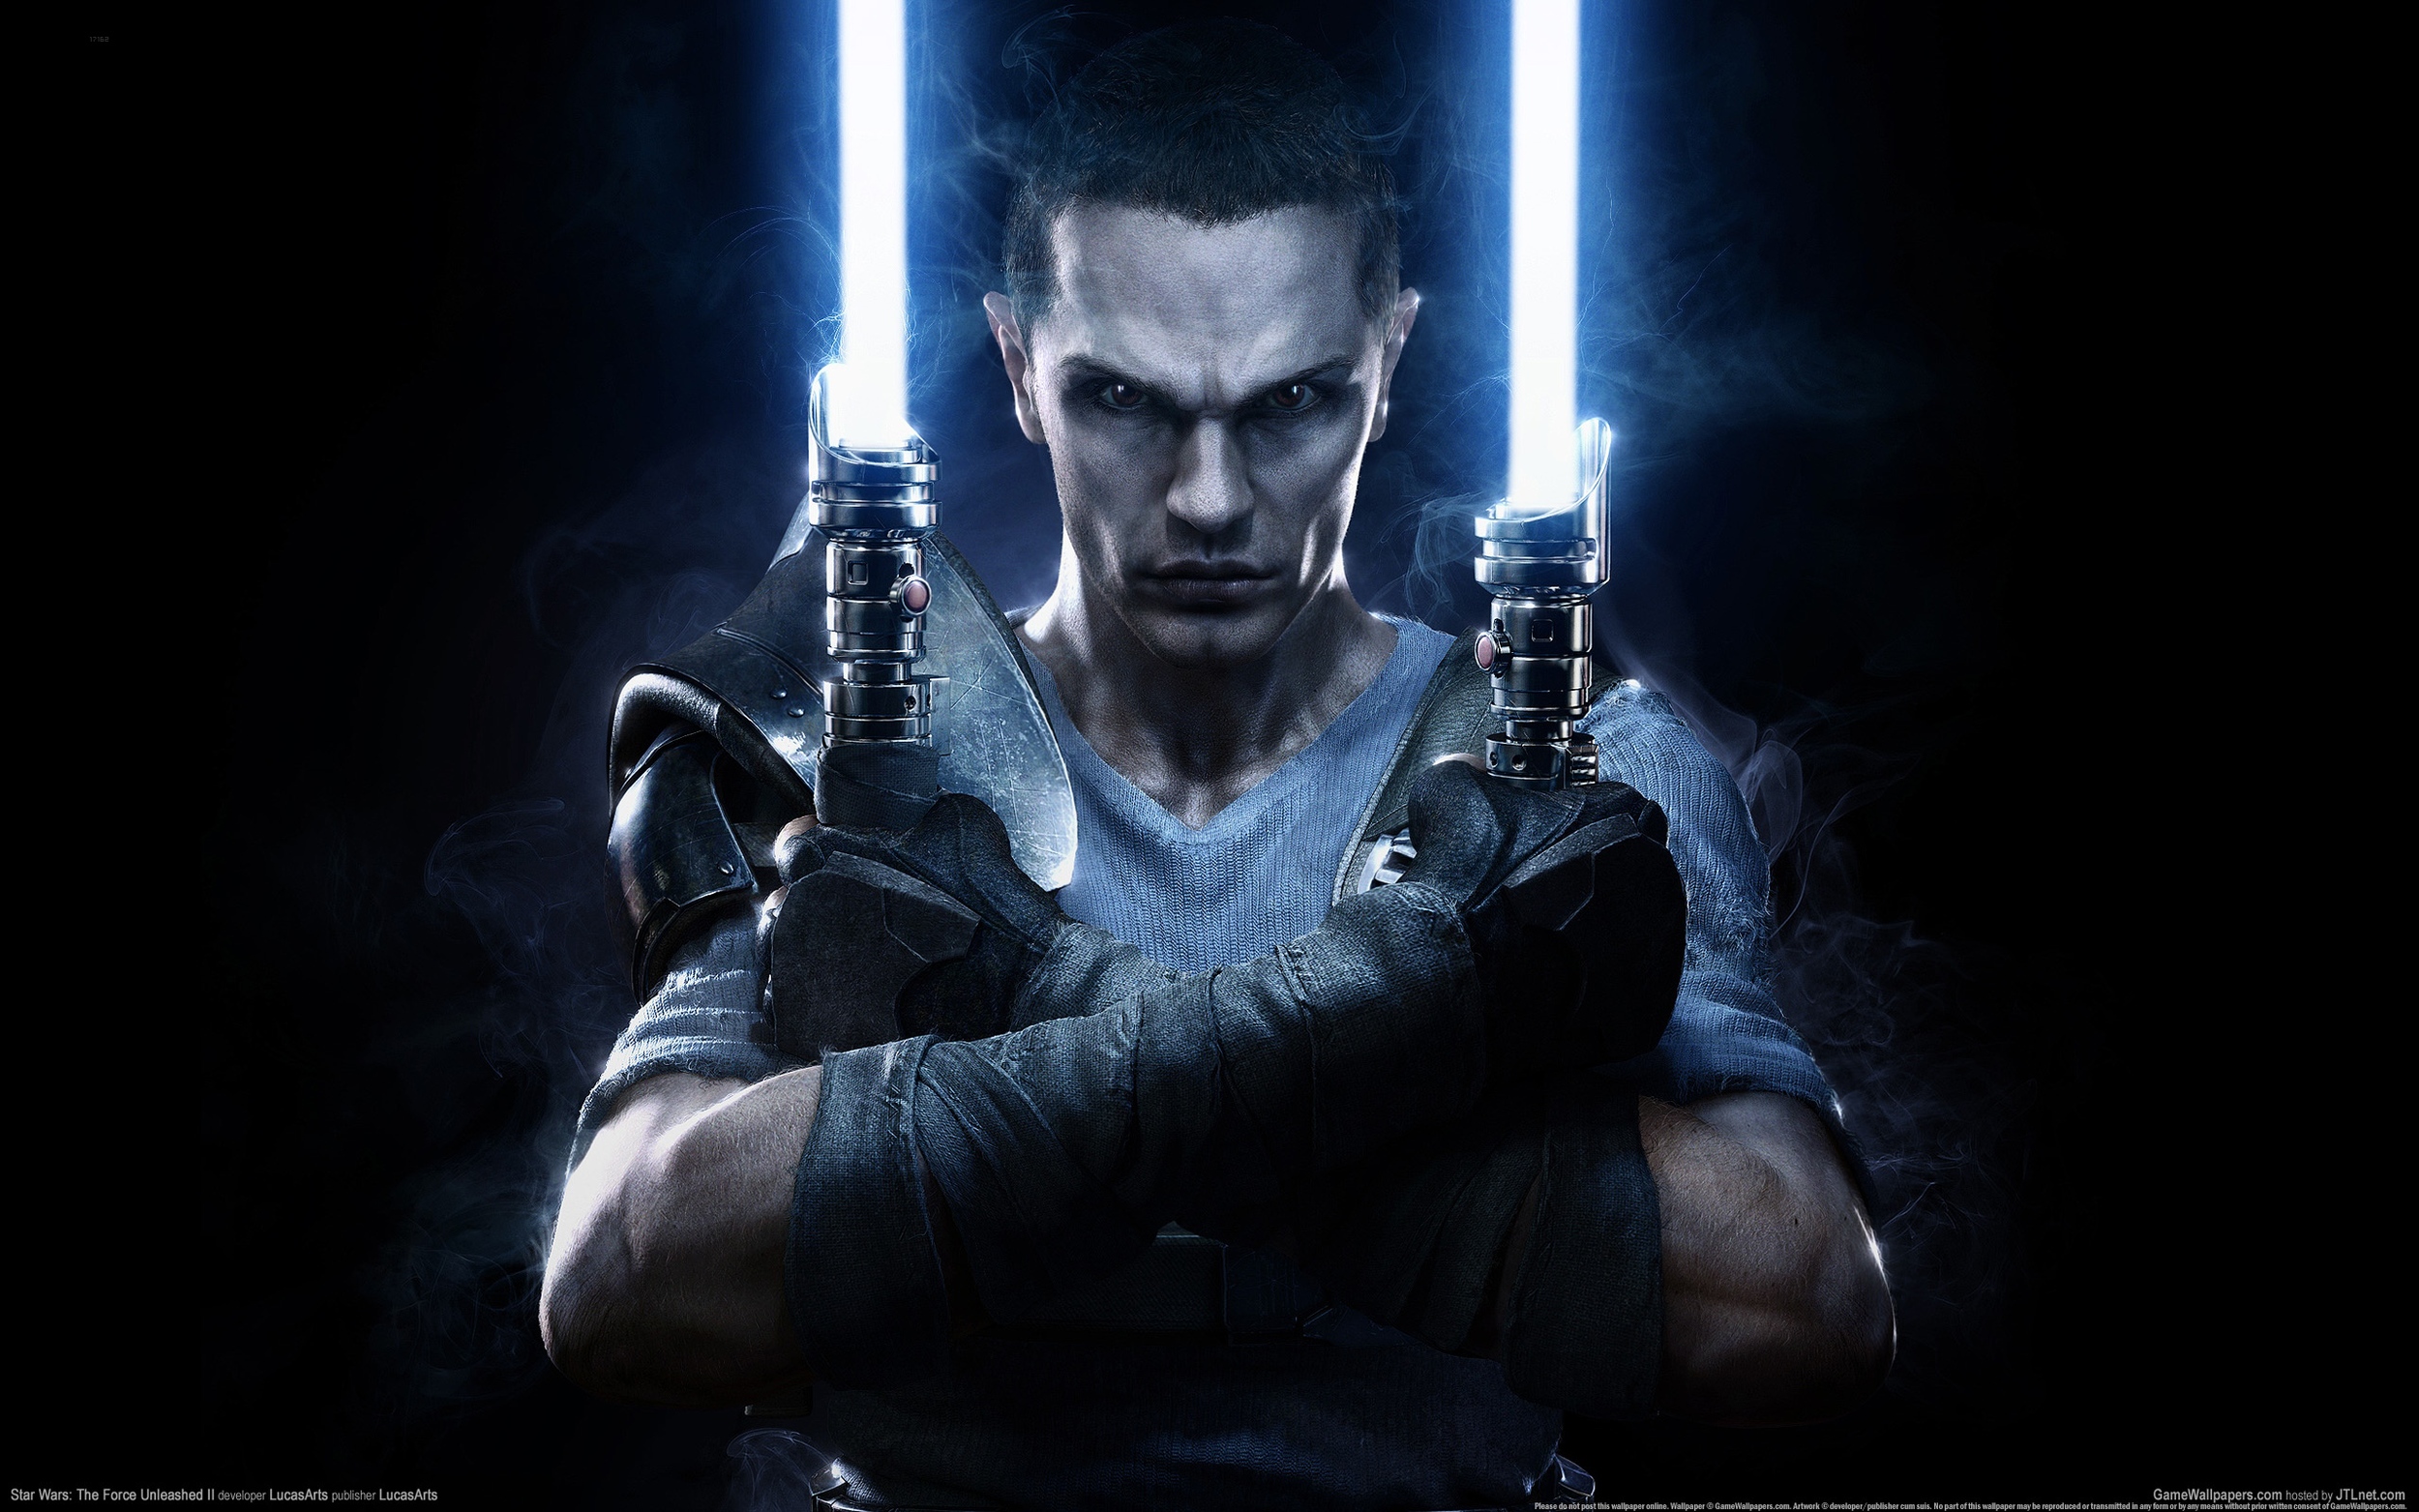 Star-Wars-The-Force-Unleashed-2-Wii.jpg